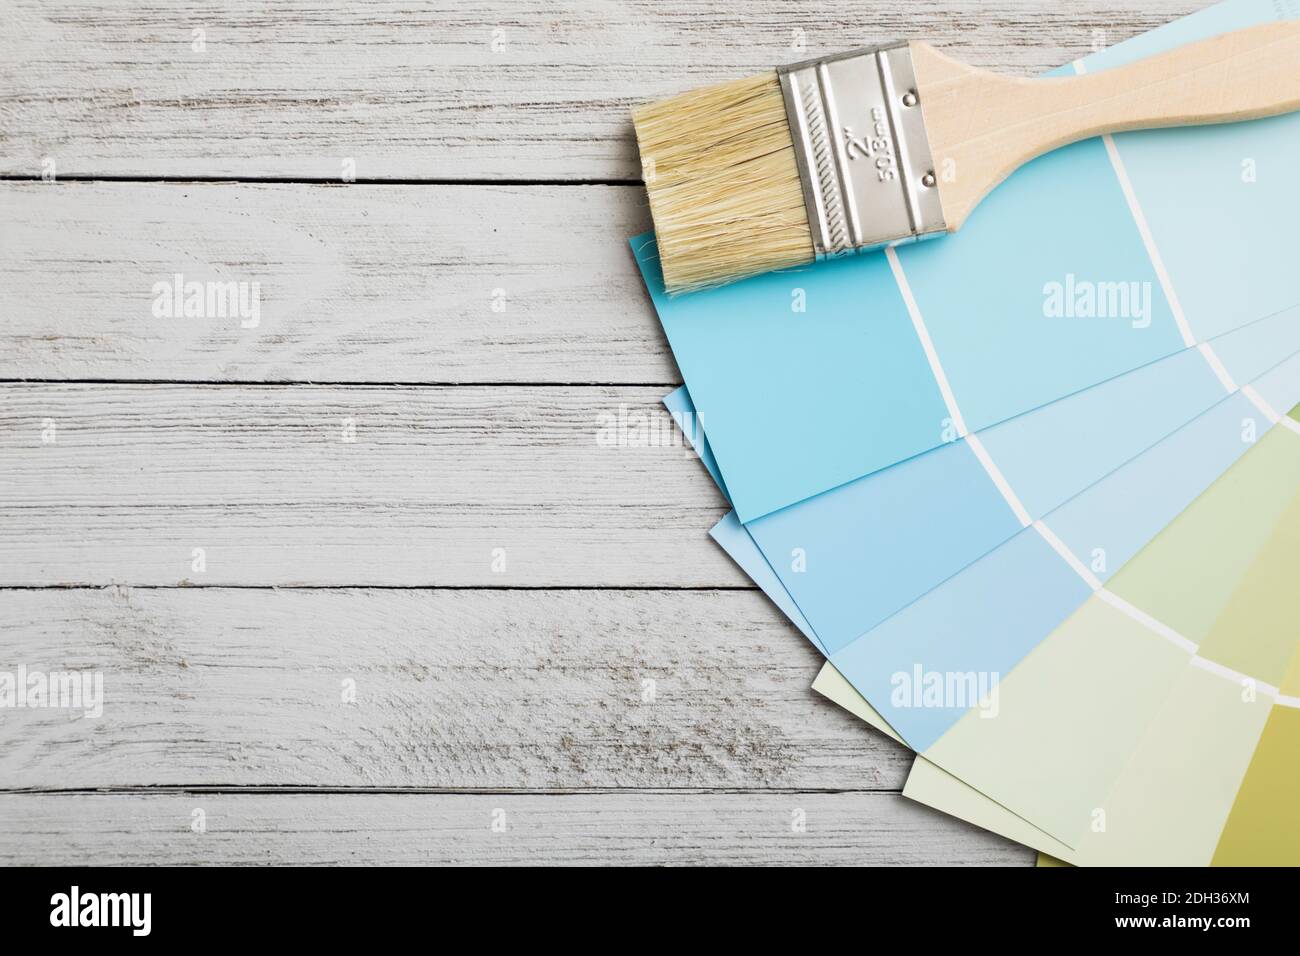 paint samples laying on wood Stock Photo